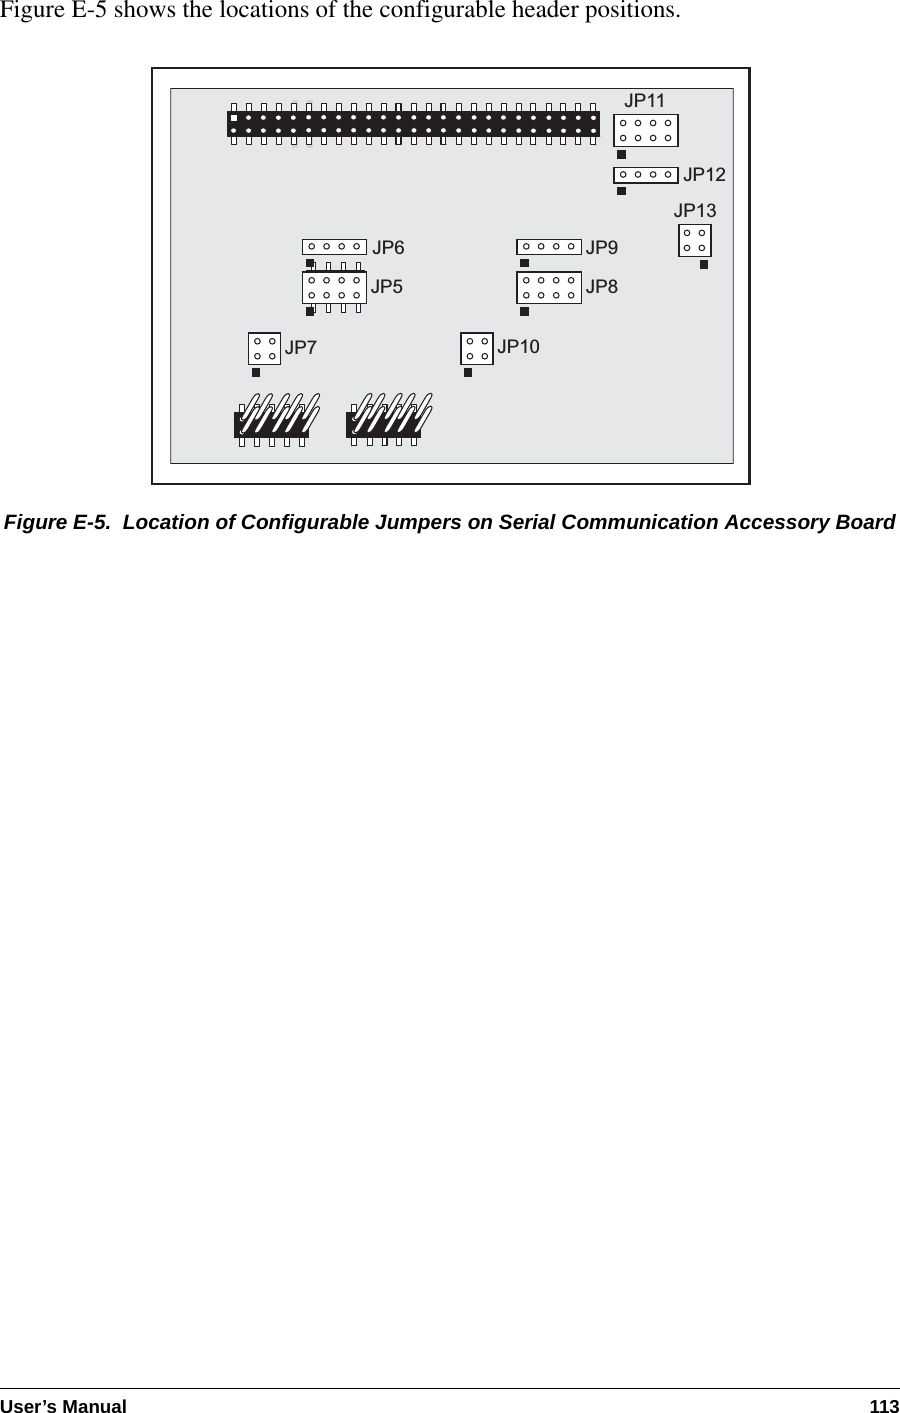 User’s Manual 113Figure E-5 shows the locations of the configurable header positions.Figure E-5.  Location of Configurable Jumpers on Serial Communication Accessory BoardJP8JP10JP13JP12JP6 JP9JP11JP7JP5